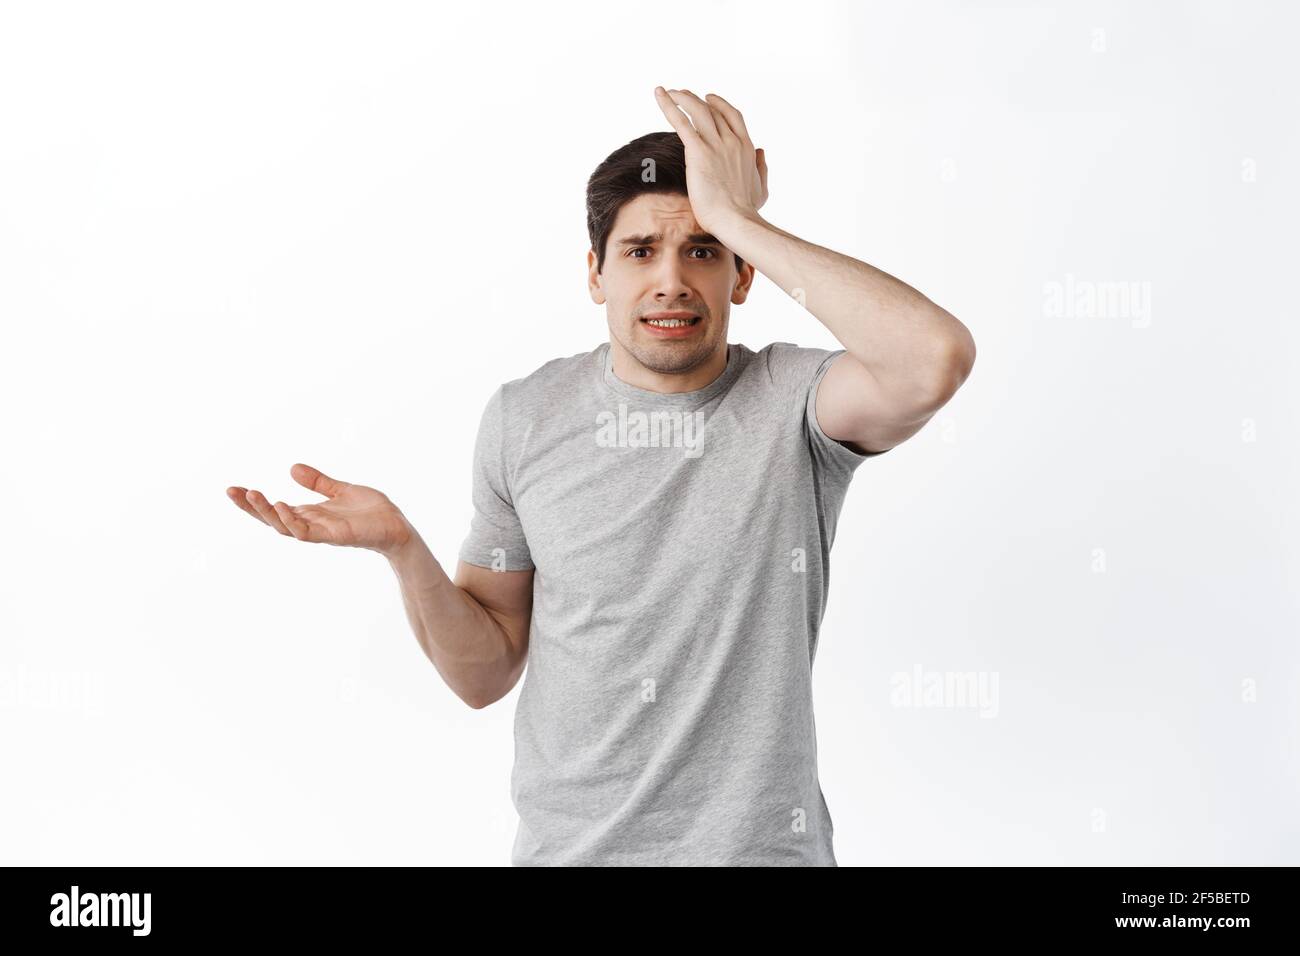 Nervous man look confused and worried, slap forehead and shrugging, forgot remember, made mistake, standing distressed against white background Stock Photo